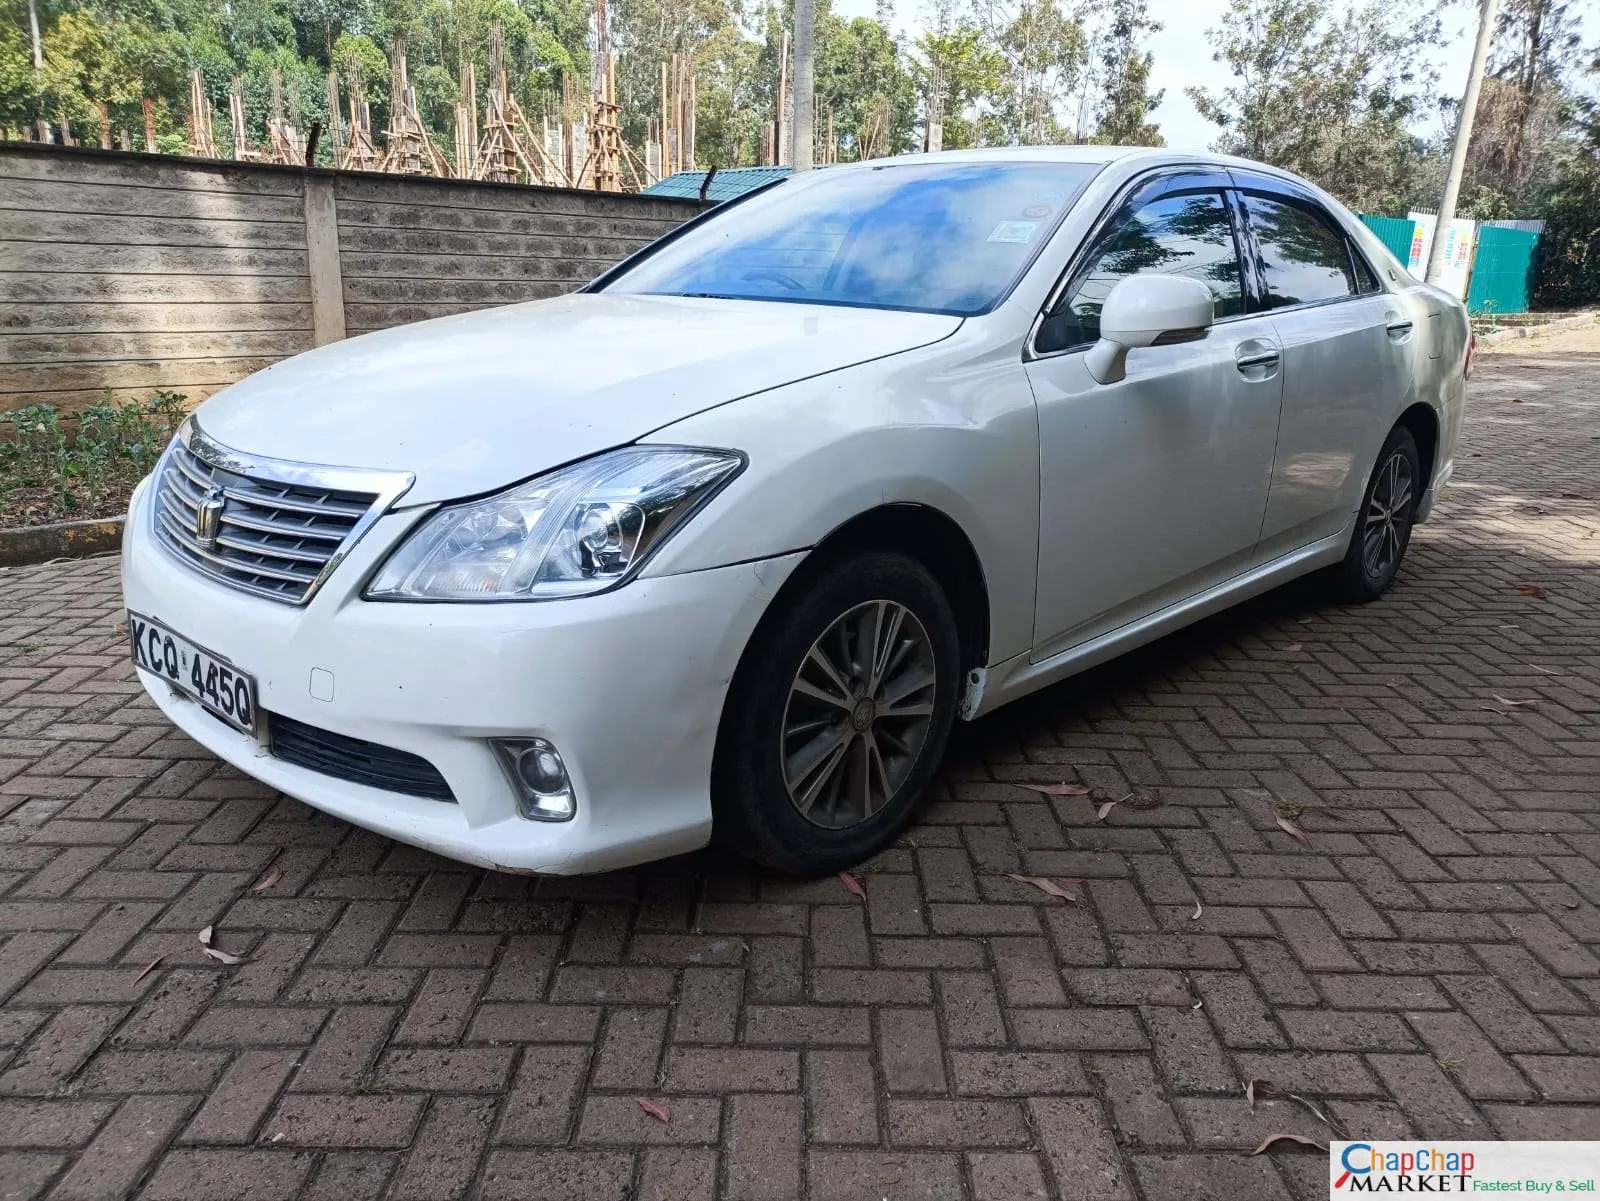 Cars Cars For Sale-Toyota CROWN kenya Royal Saloon You pay Deposit crown for sale in kenya hire purchase installments Trade in Ok EXCLUSIVE 5